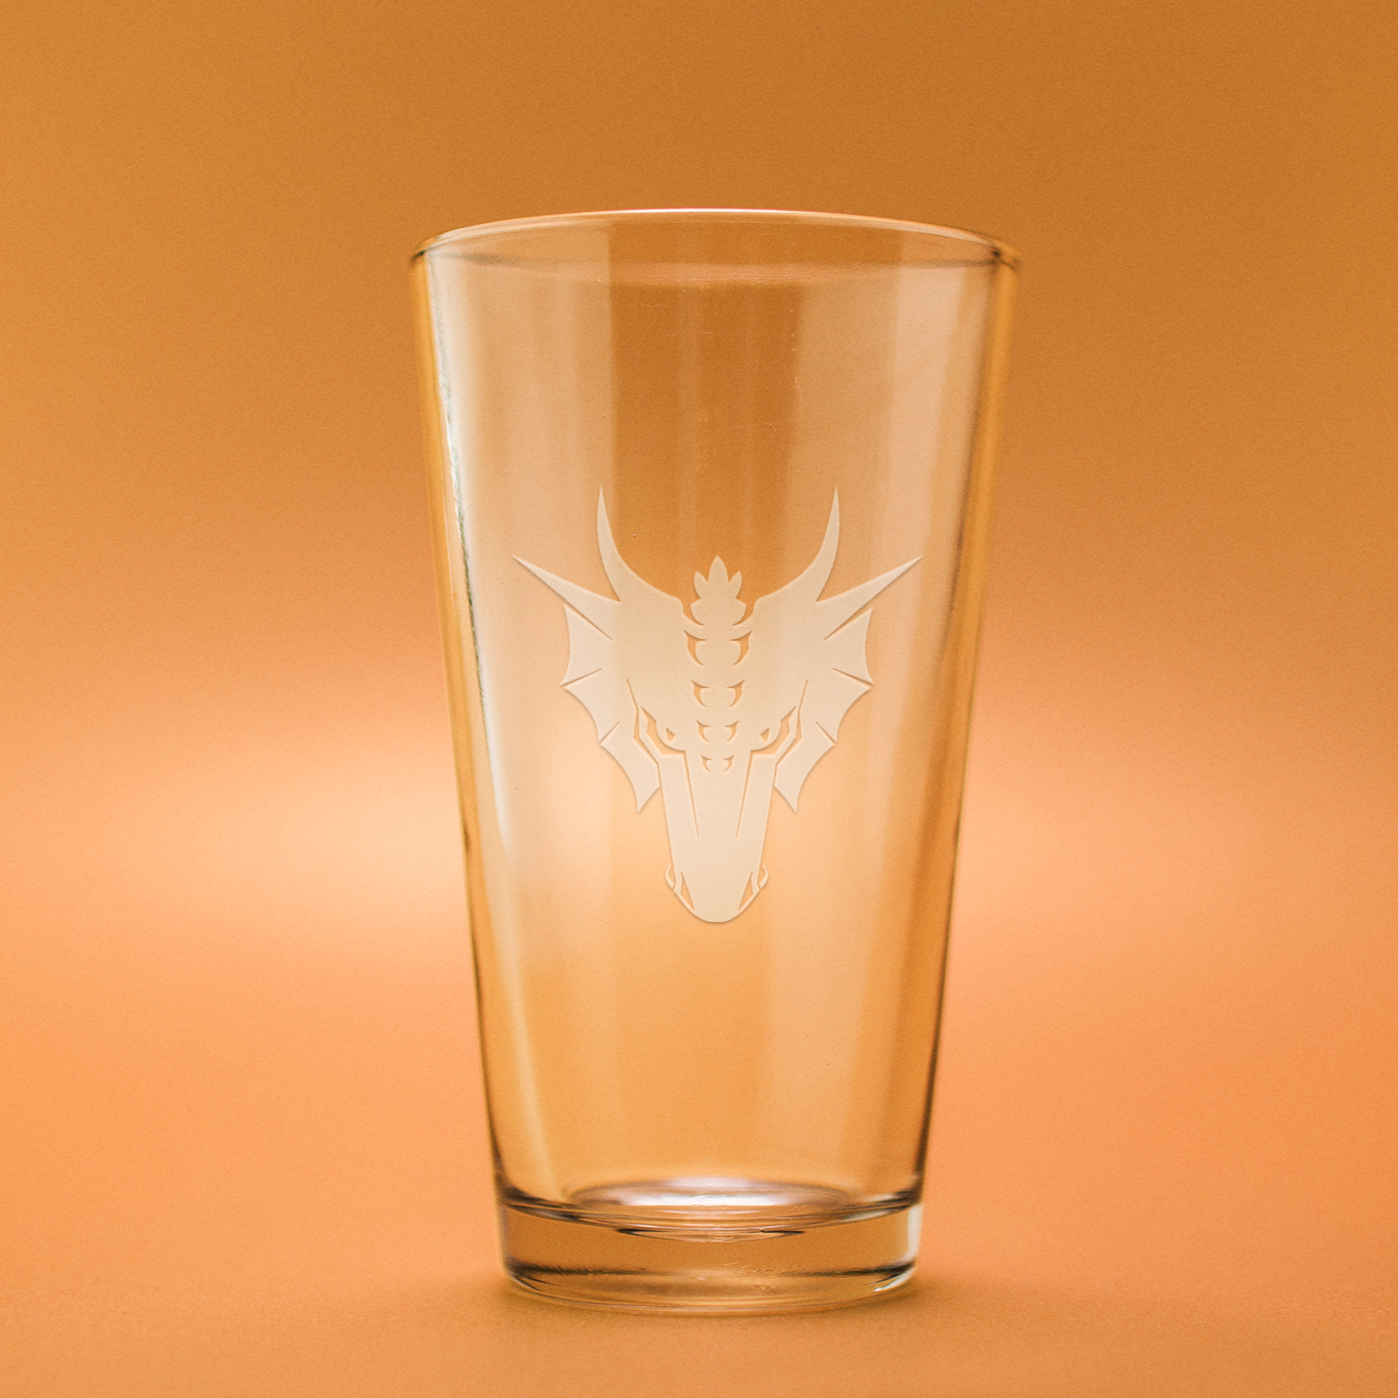 Dragon Head Etched Beer Glass